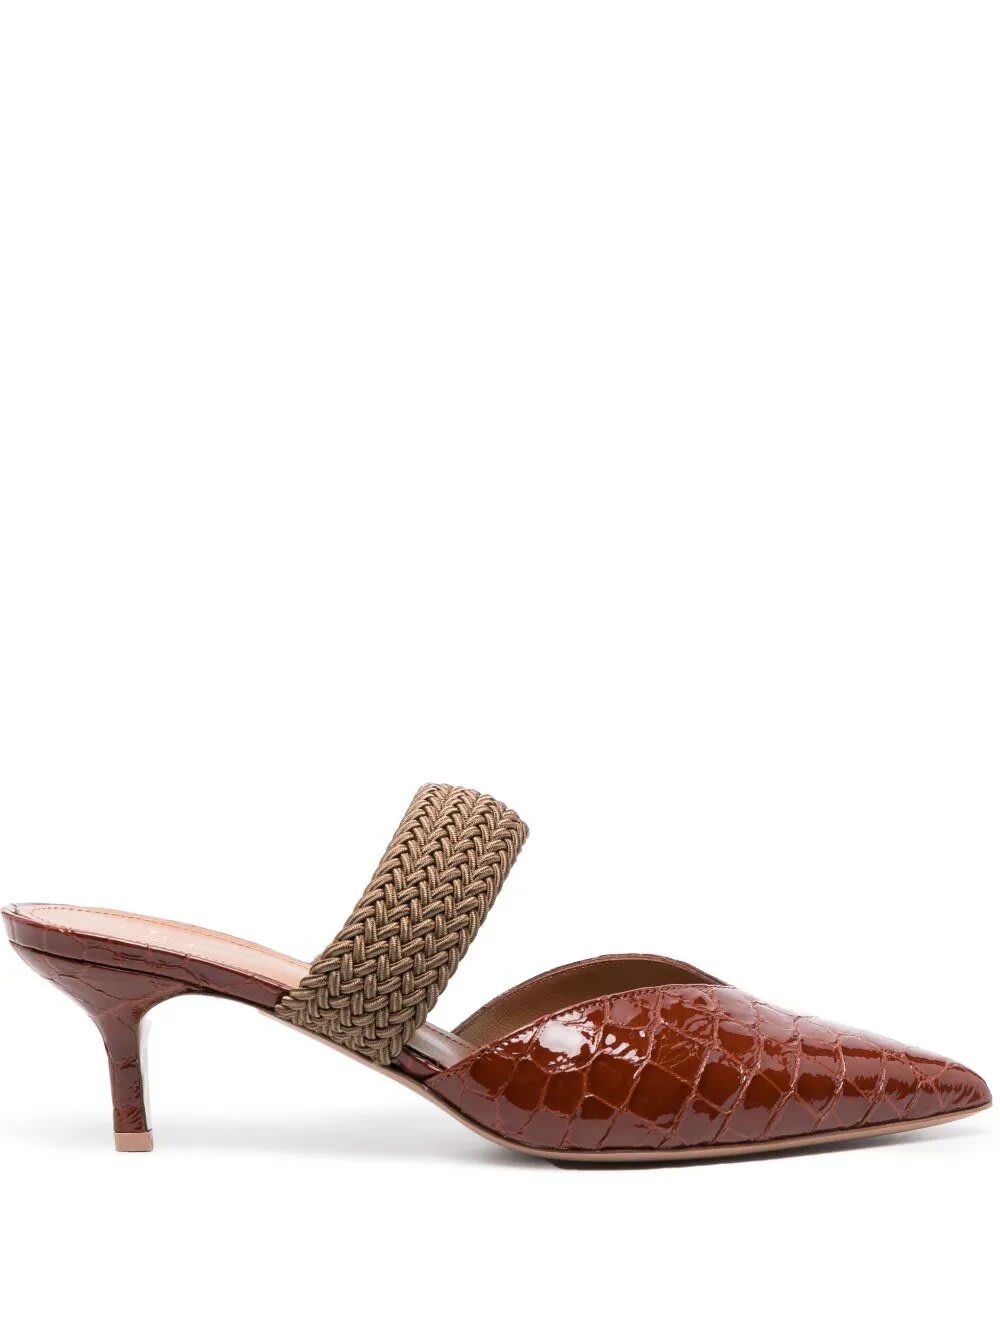 Malone Souliers Mules Tacco45 In Cinnamon Brown